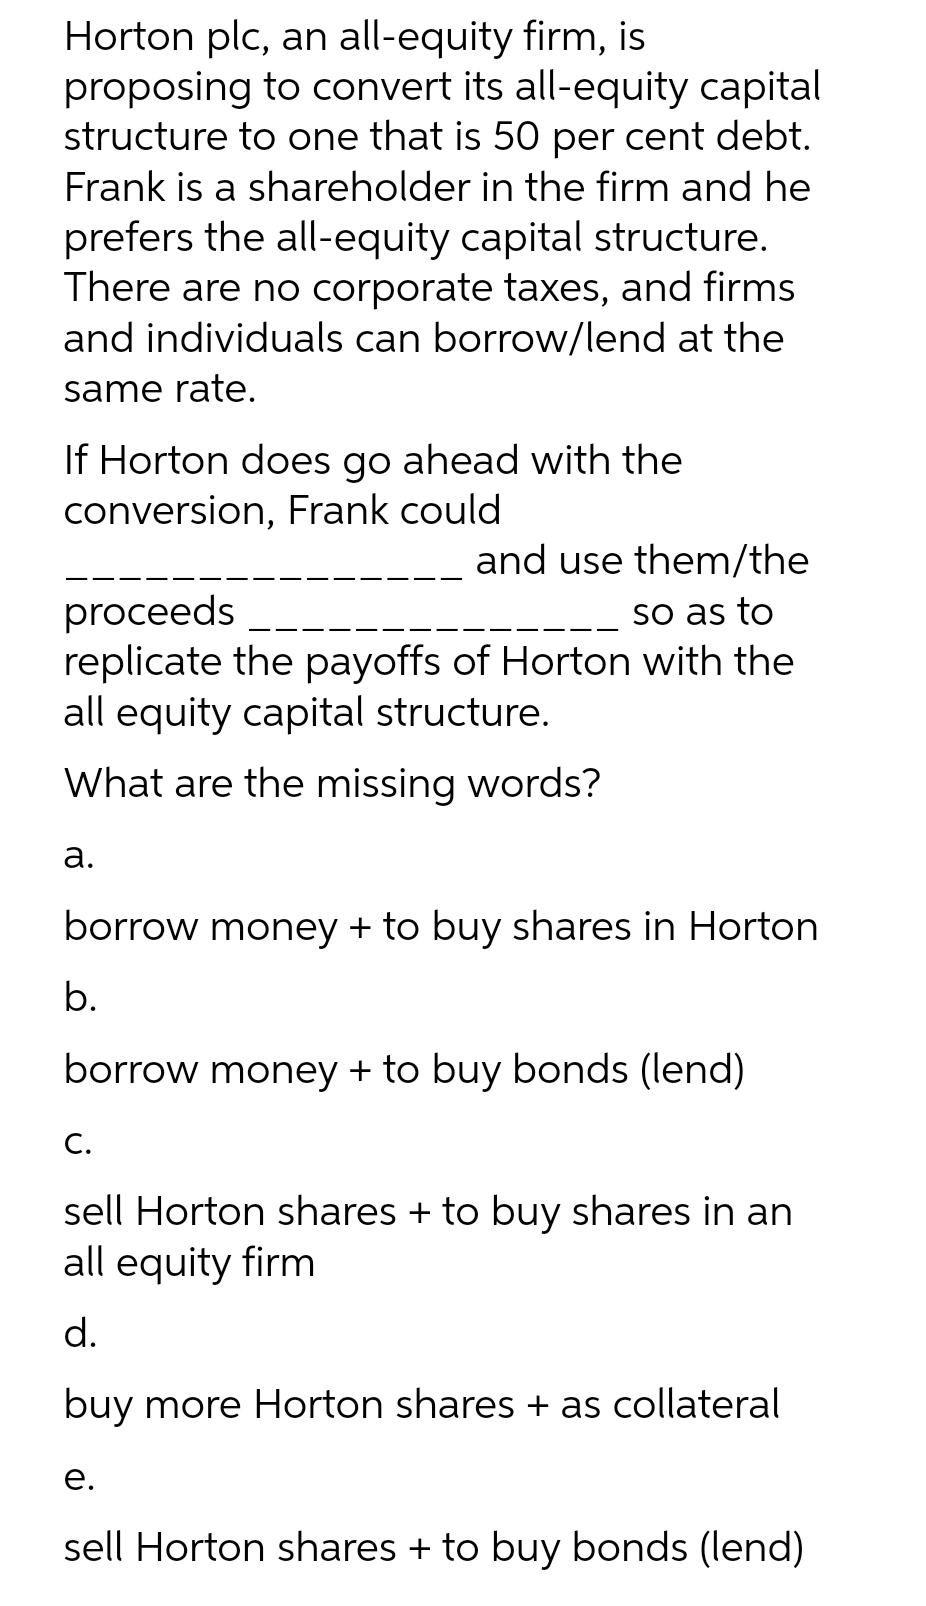 Horton plc, an all-equity firm, is
proposing to convert its all-equity capital
structure to one that is 50 per cent debt.
Frank is a shareholder in the firm and he
prefers the all-equity capital structure.
There are no corporate taxes, and firms
and individuals can borrow/lend at the
same rate.
If Horton does go ahead with the
conversion, Frank could
and use them/the
proceeds
replicate the payoffs of Horton with the
all equity capital structure.
so as to
What are the missing words?
а.
borrow money + to buy shares in Horton
b.
borrow money + to buy bonds (lend)
C.
sell Horton shares + to buy shares in an
all equity firm
d.
buy more Horton shares + as collateral
е.
sell Horton shares + to buy bonds (lend)
